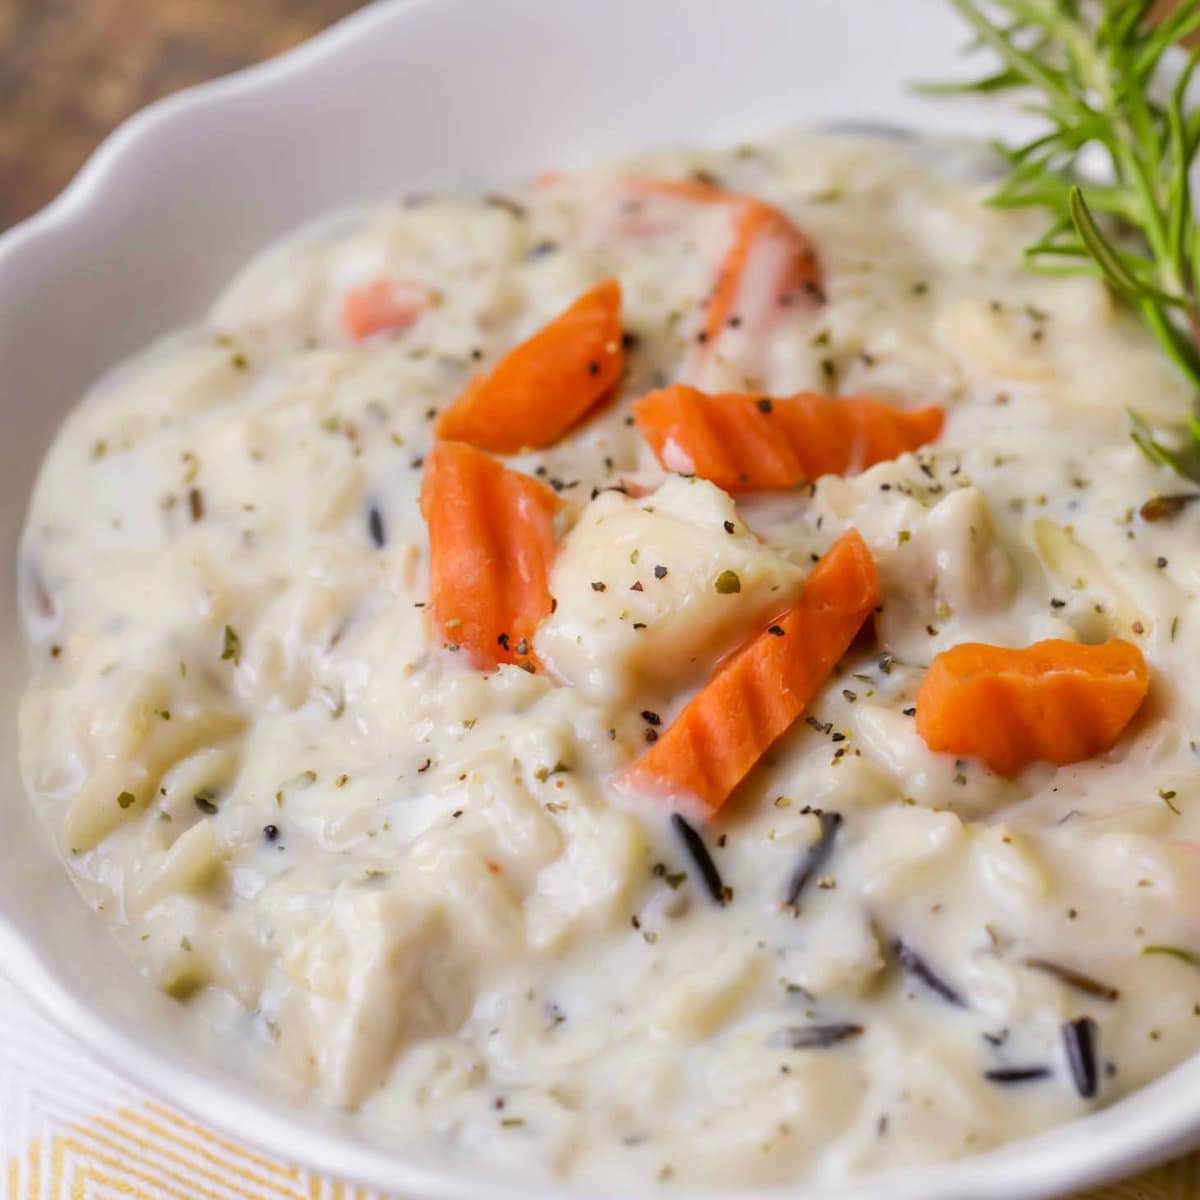 Fall soup recipes - Chicken and wild rice soup in a white bowl.